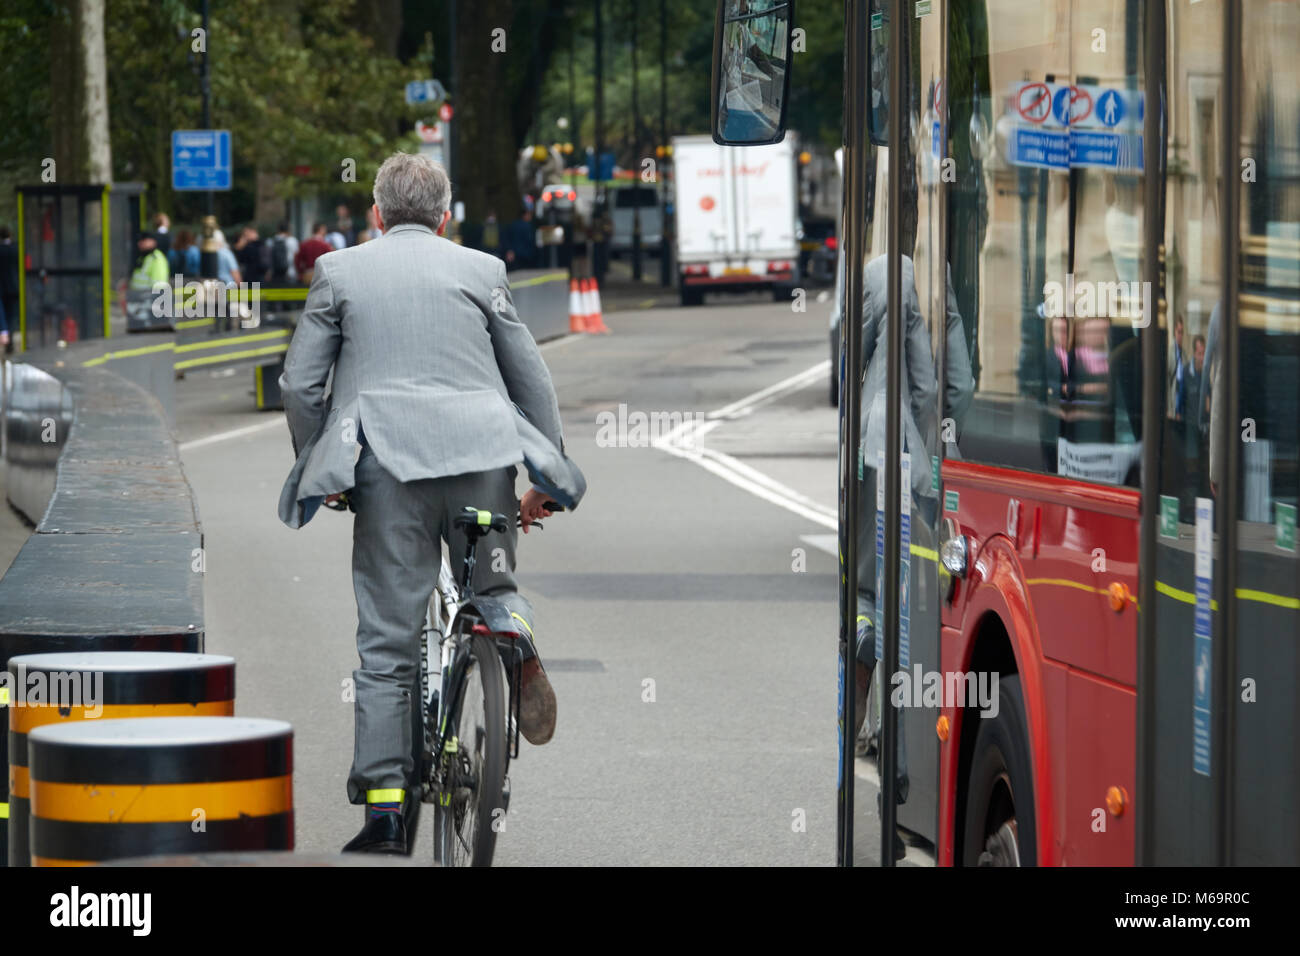 A businessman in a business suit rides a bike through the streets of London. Stock Photo